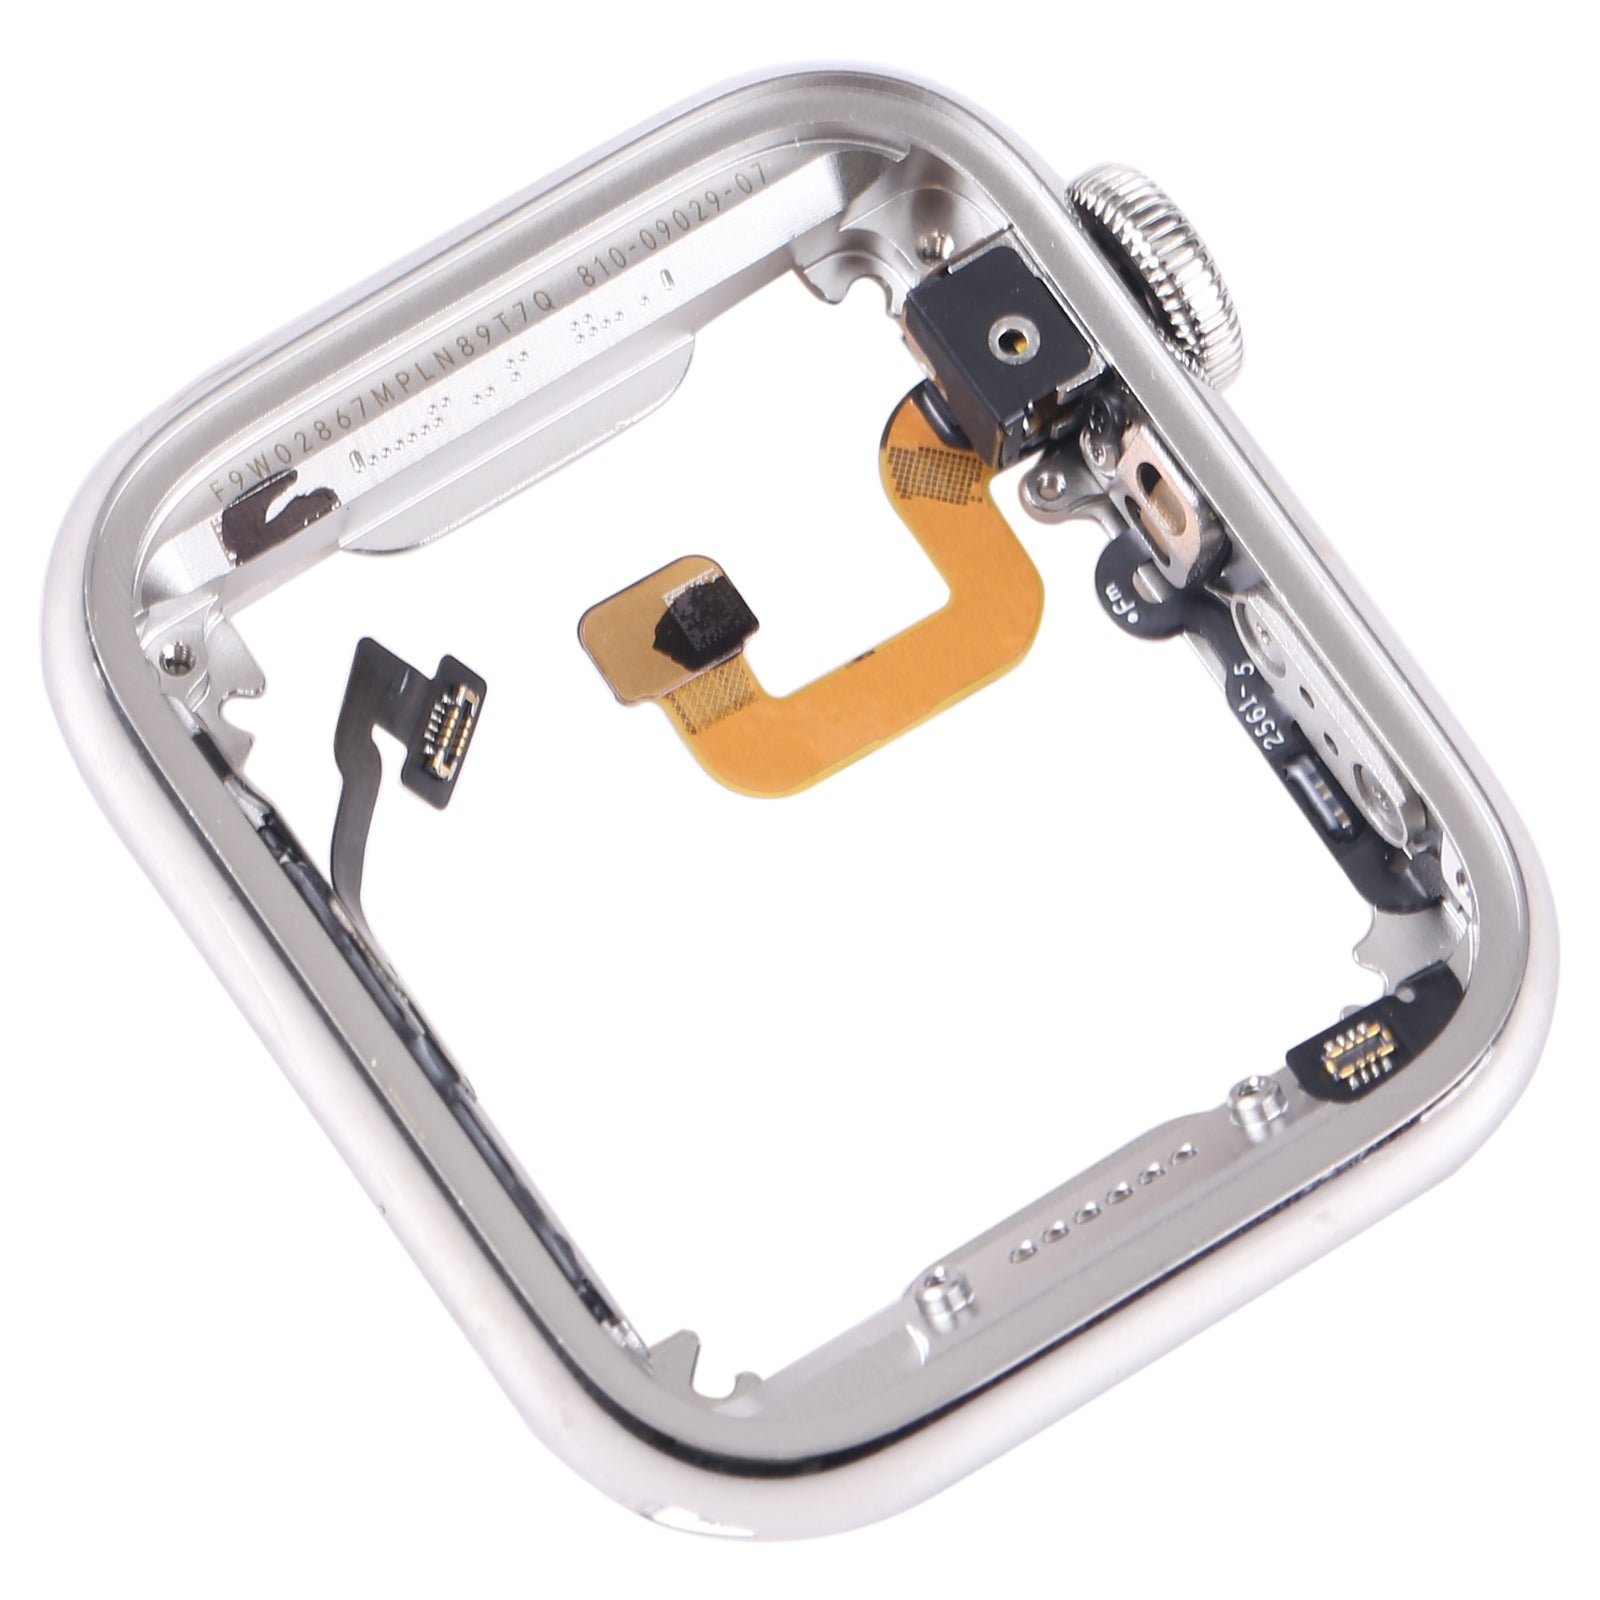 LCD Intermediate Frame Chassis Apple Watch Series 6 40mm